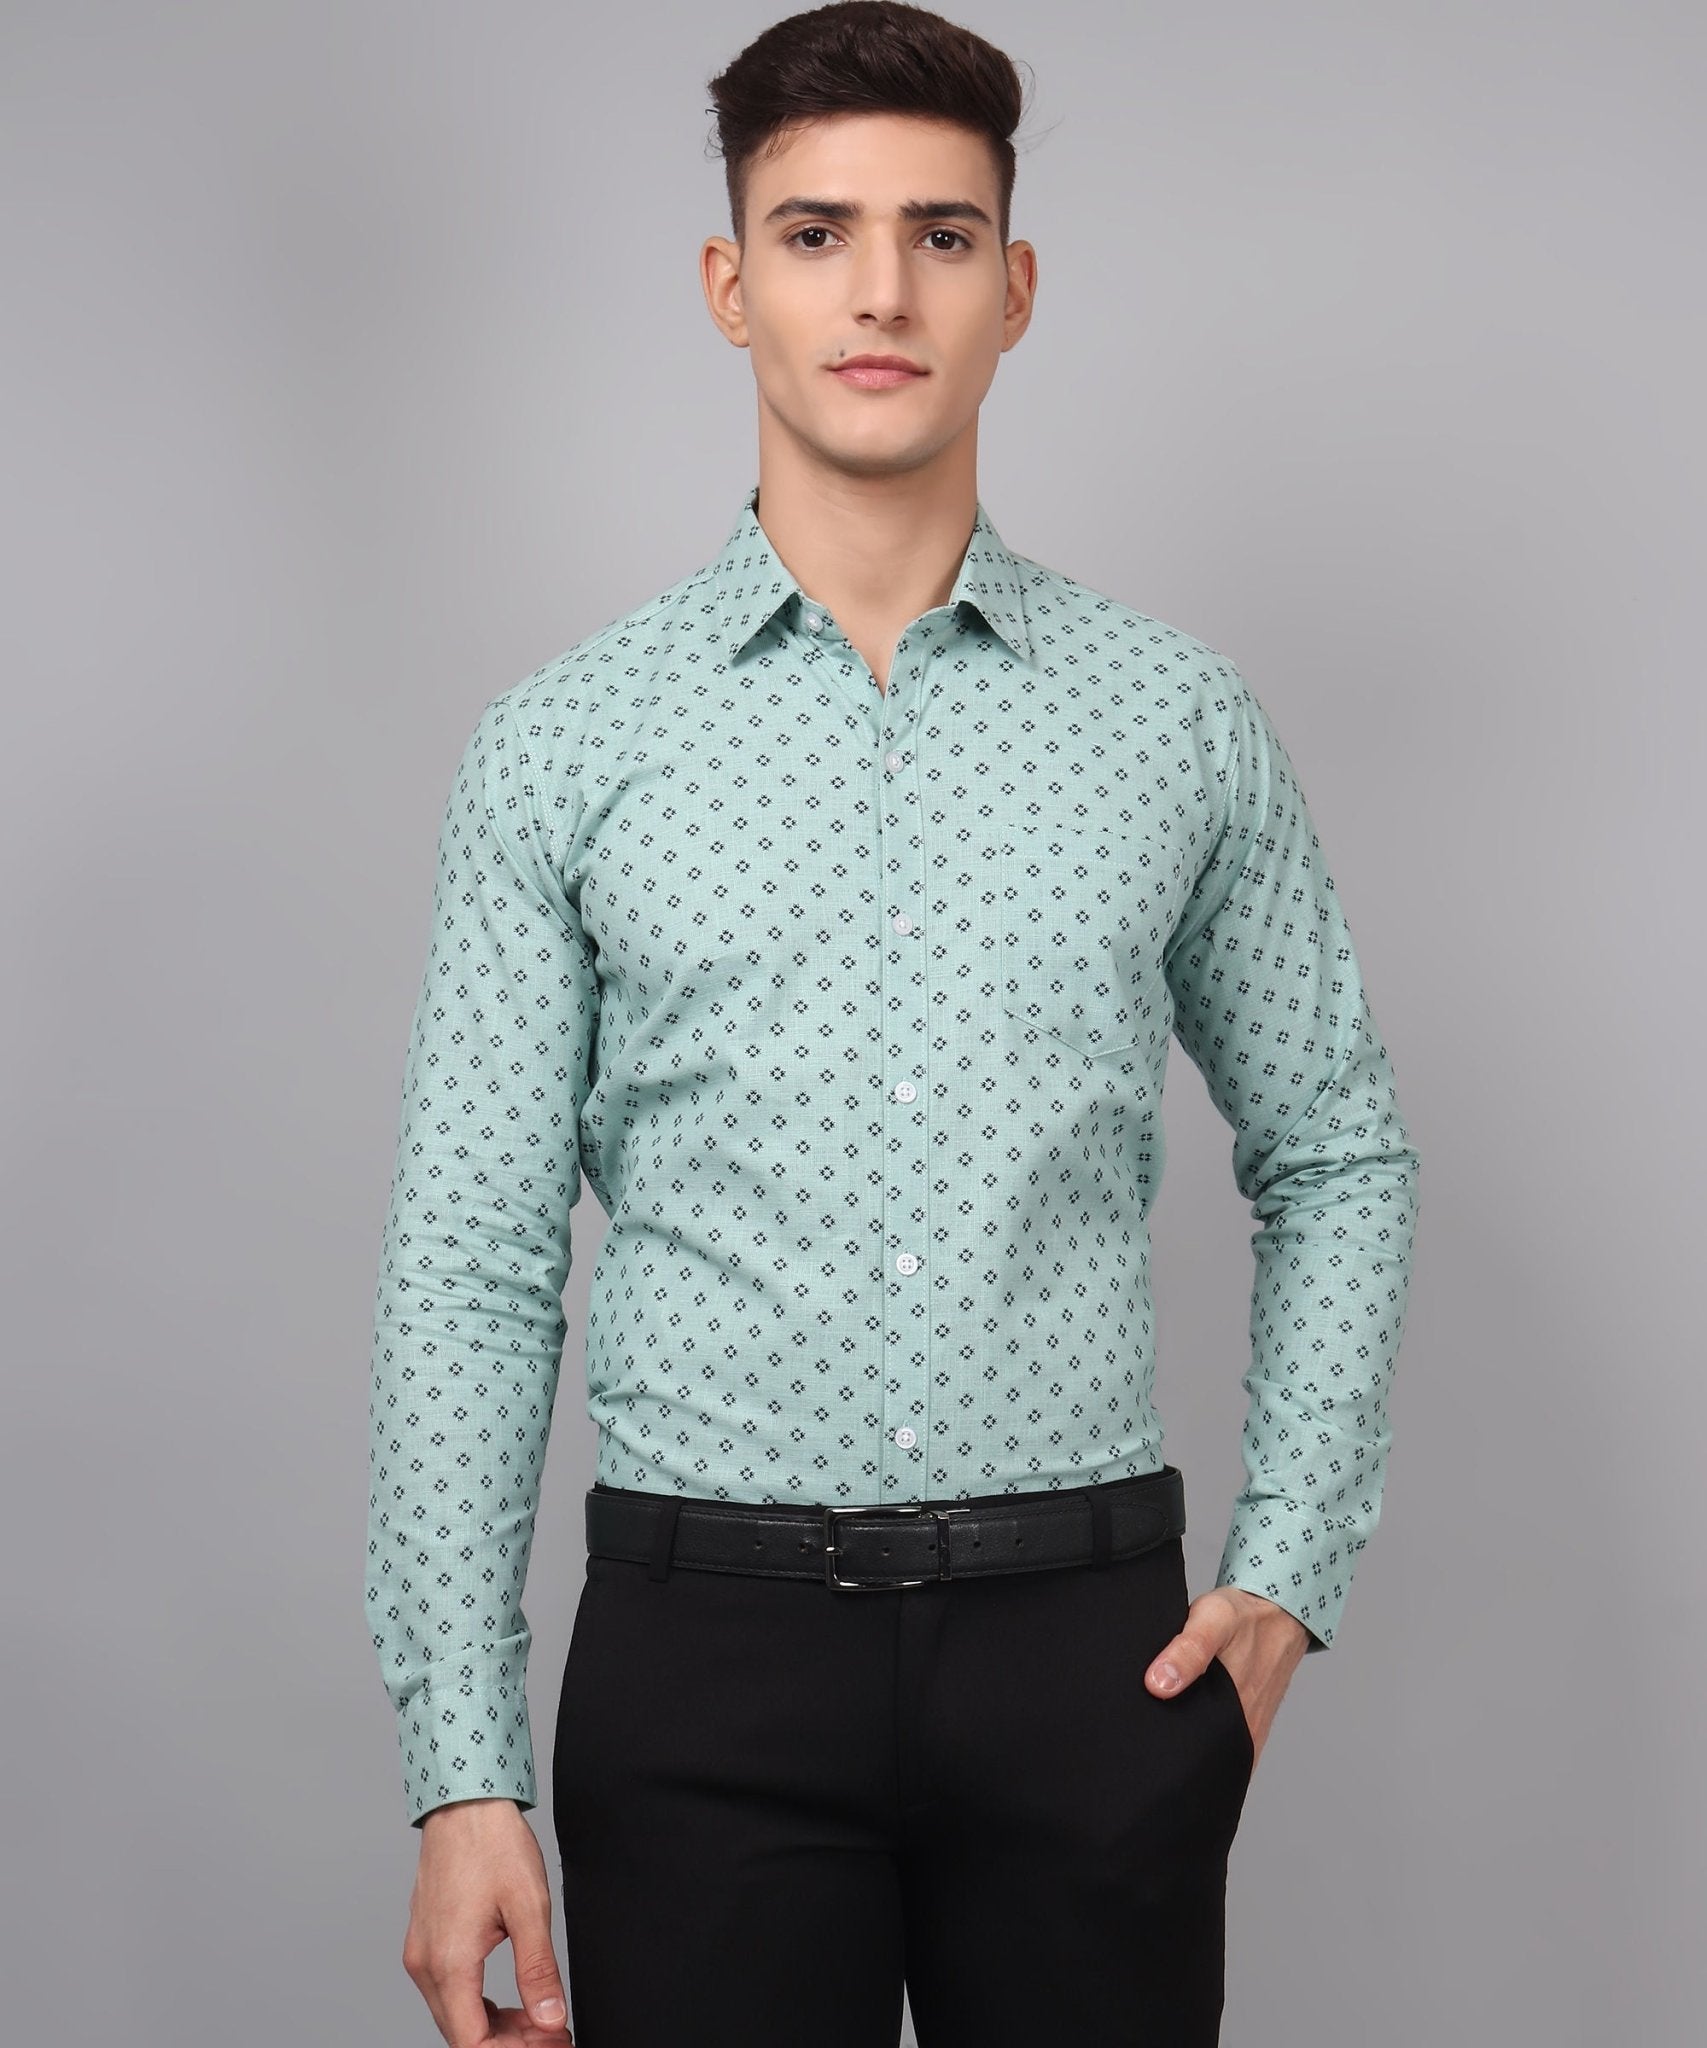 Classy TryBuy Premium Cotton Linen Printed Casual/Formal Shirt for Men - TryBuy® USA🇺🇸